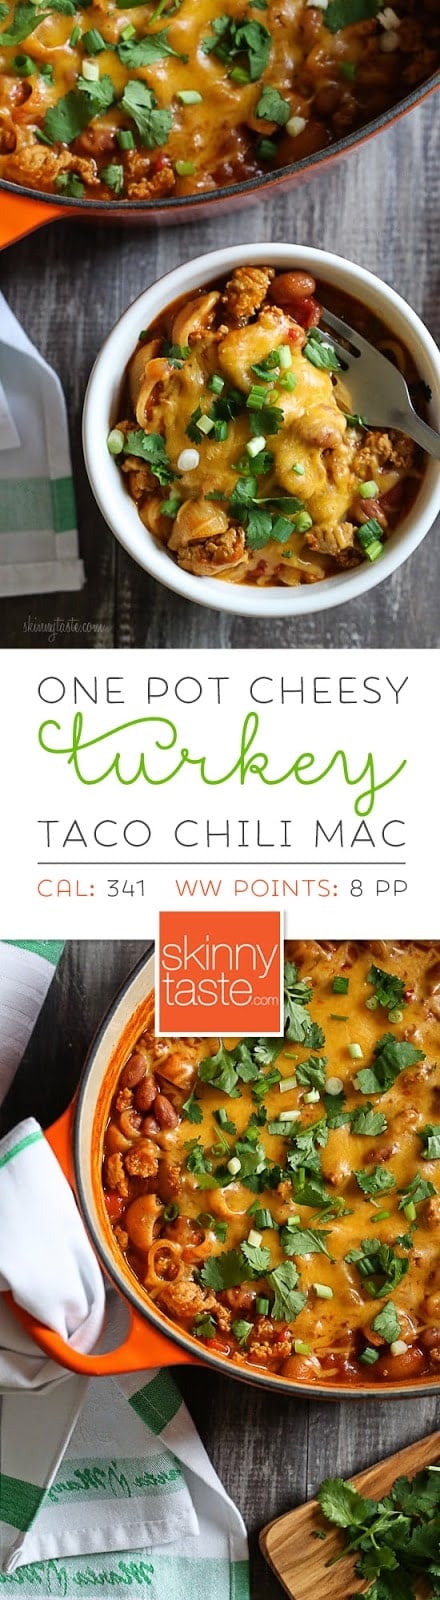 One Pot Cheesy Turkey Taco Chili Mac – pure comfort food, packed with protein & fiber all in one pot!